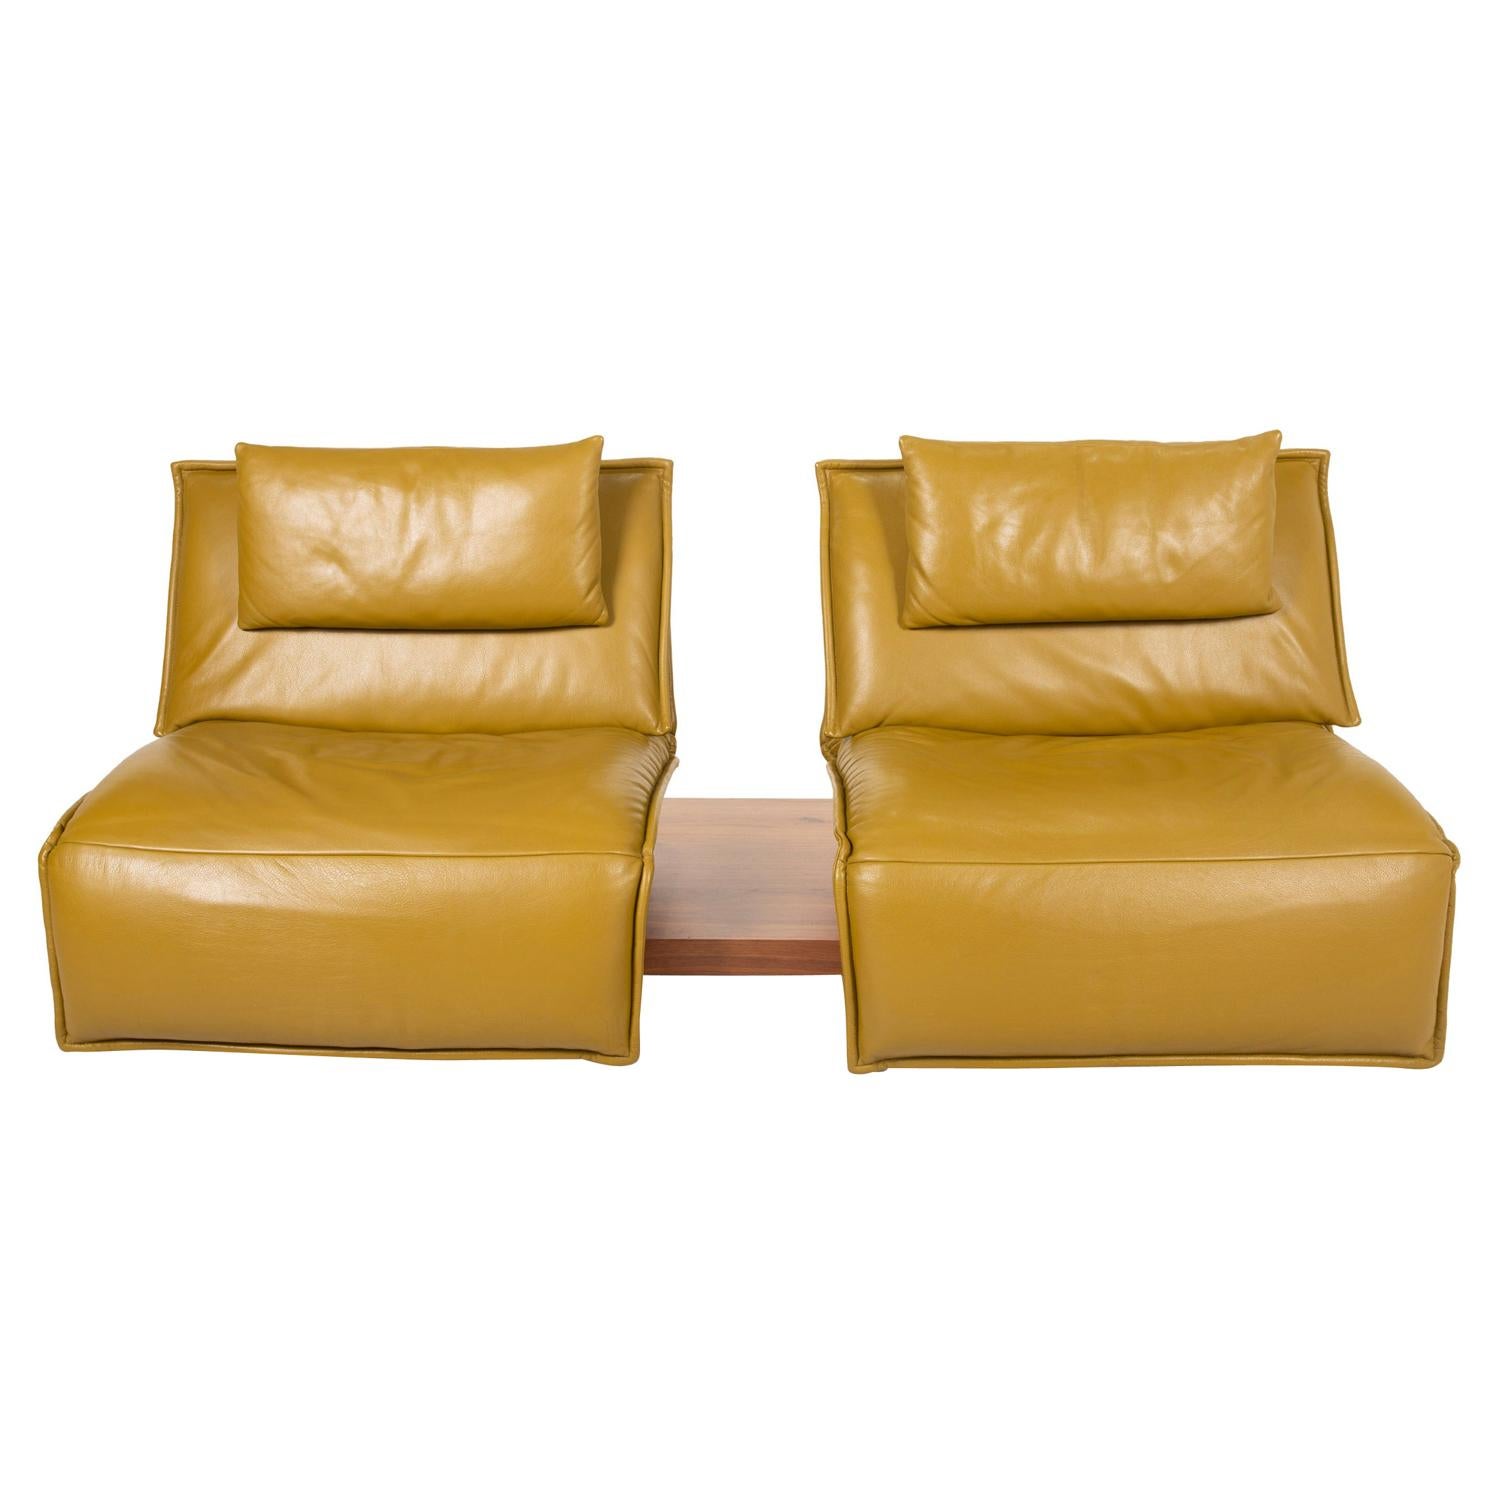 Koinor Free Motion Edit Leather Sofa Green Two Seater Yellow Wood Couch with For Sale